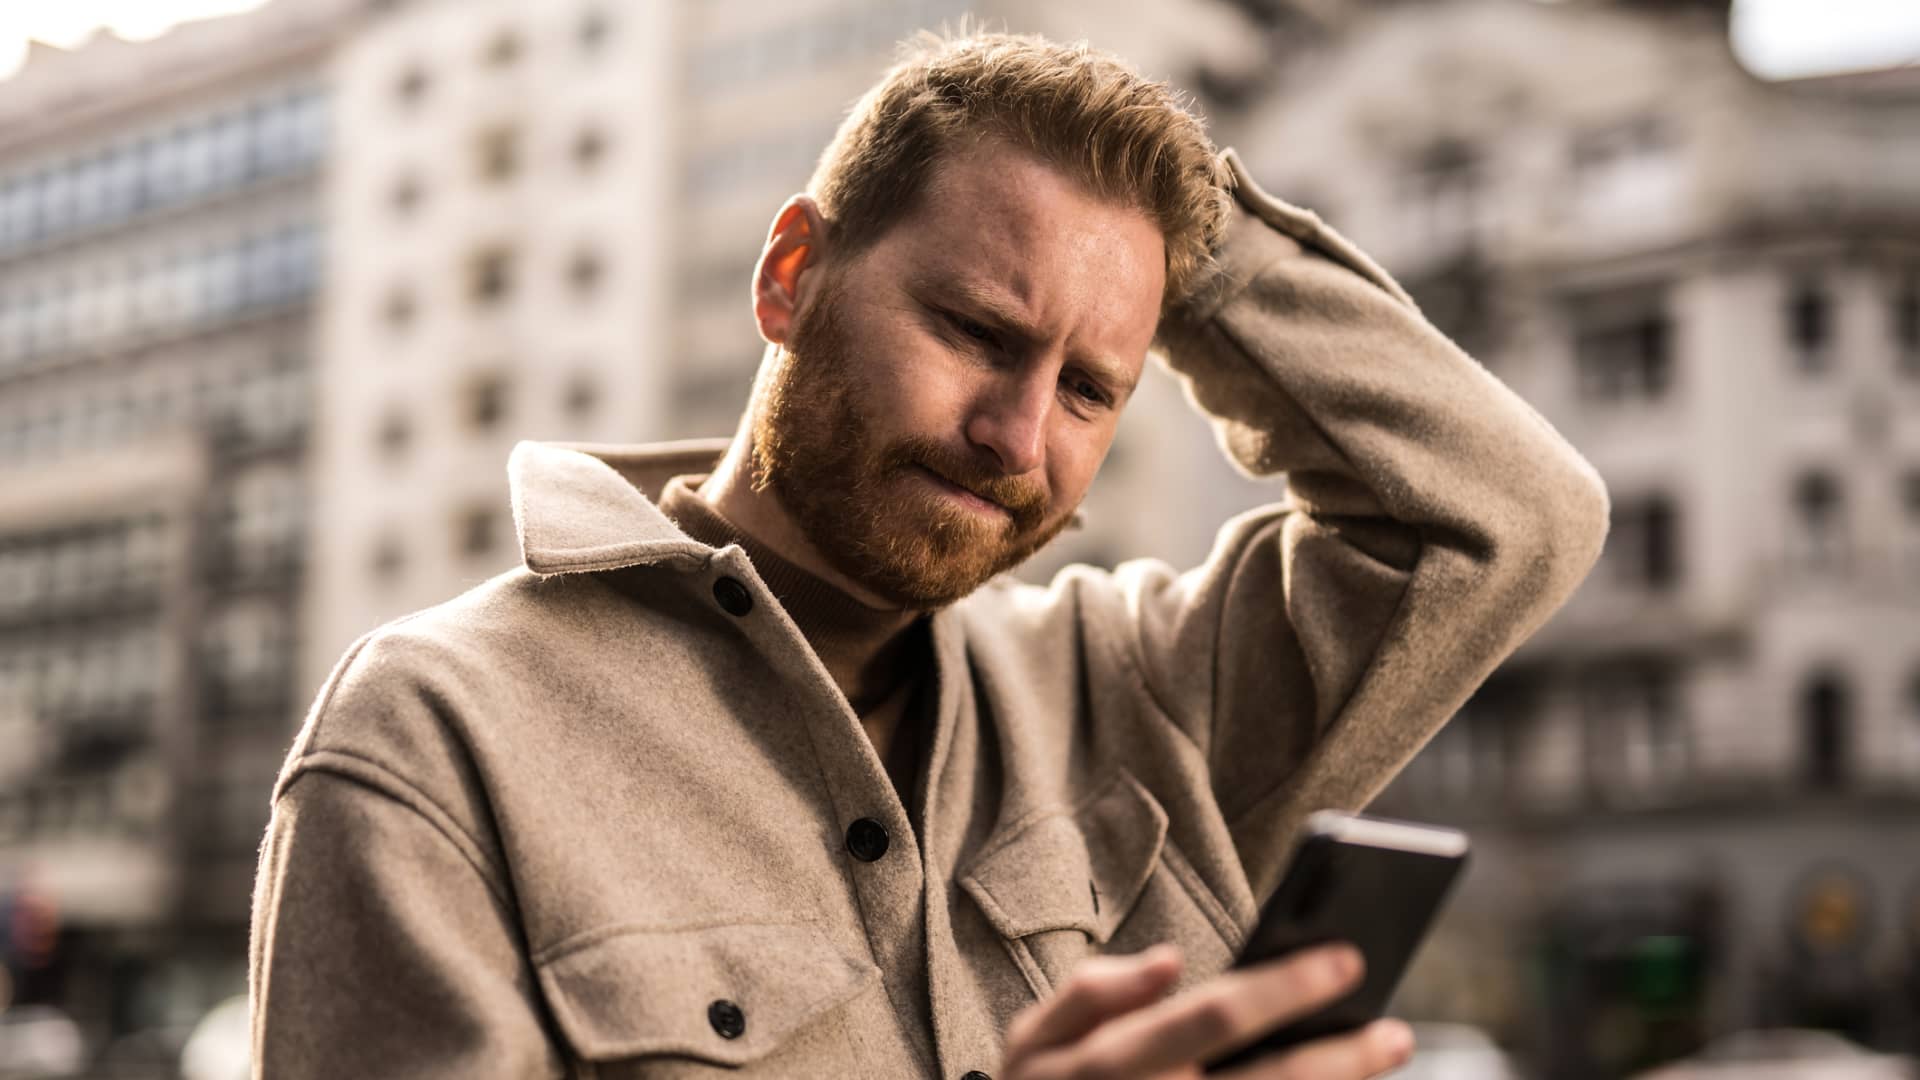 Feel anxious when you don't have your cell phone? You may have 'nomophobia'—how to spot the signs